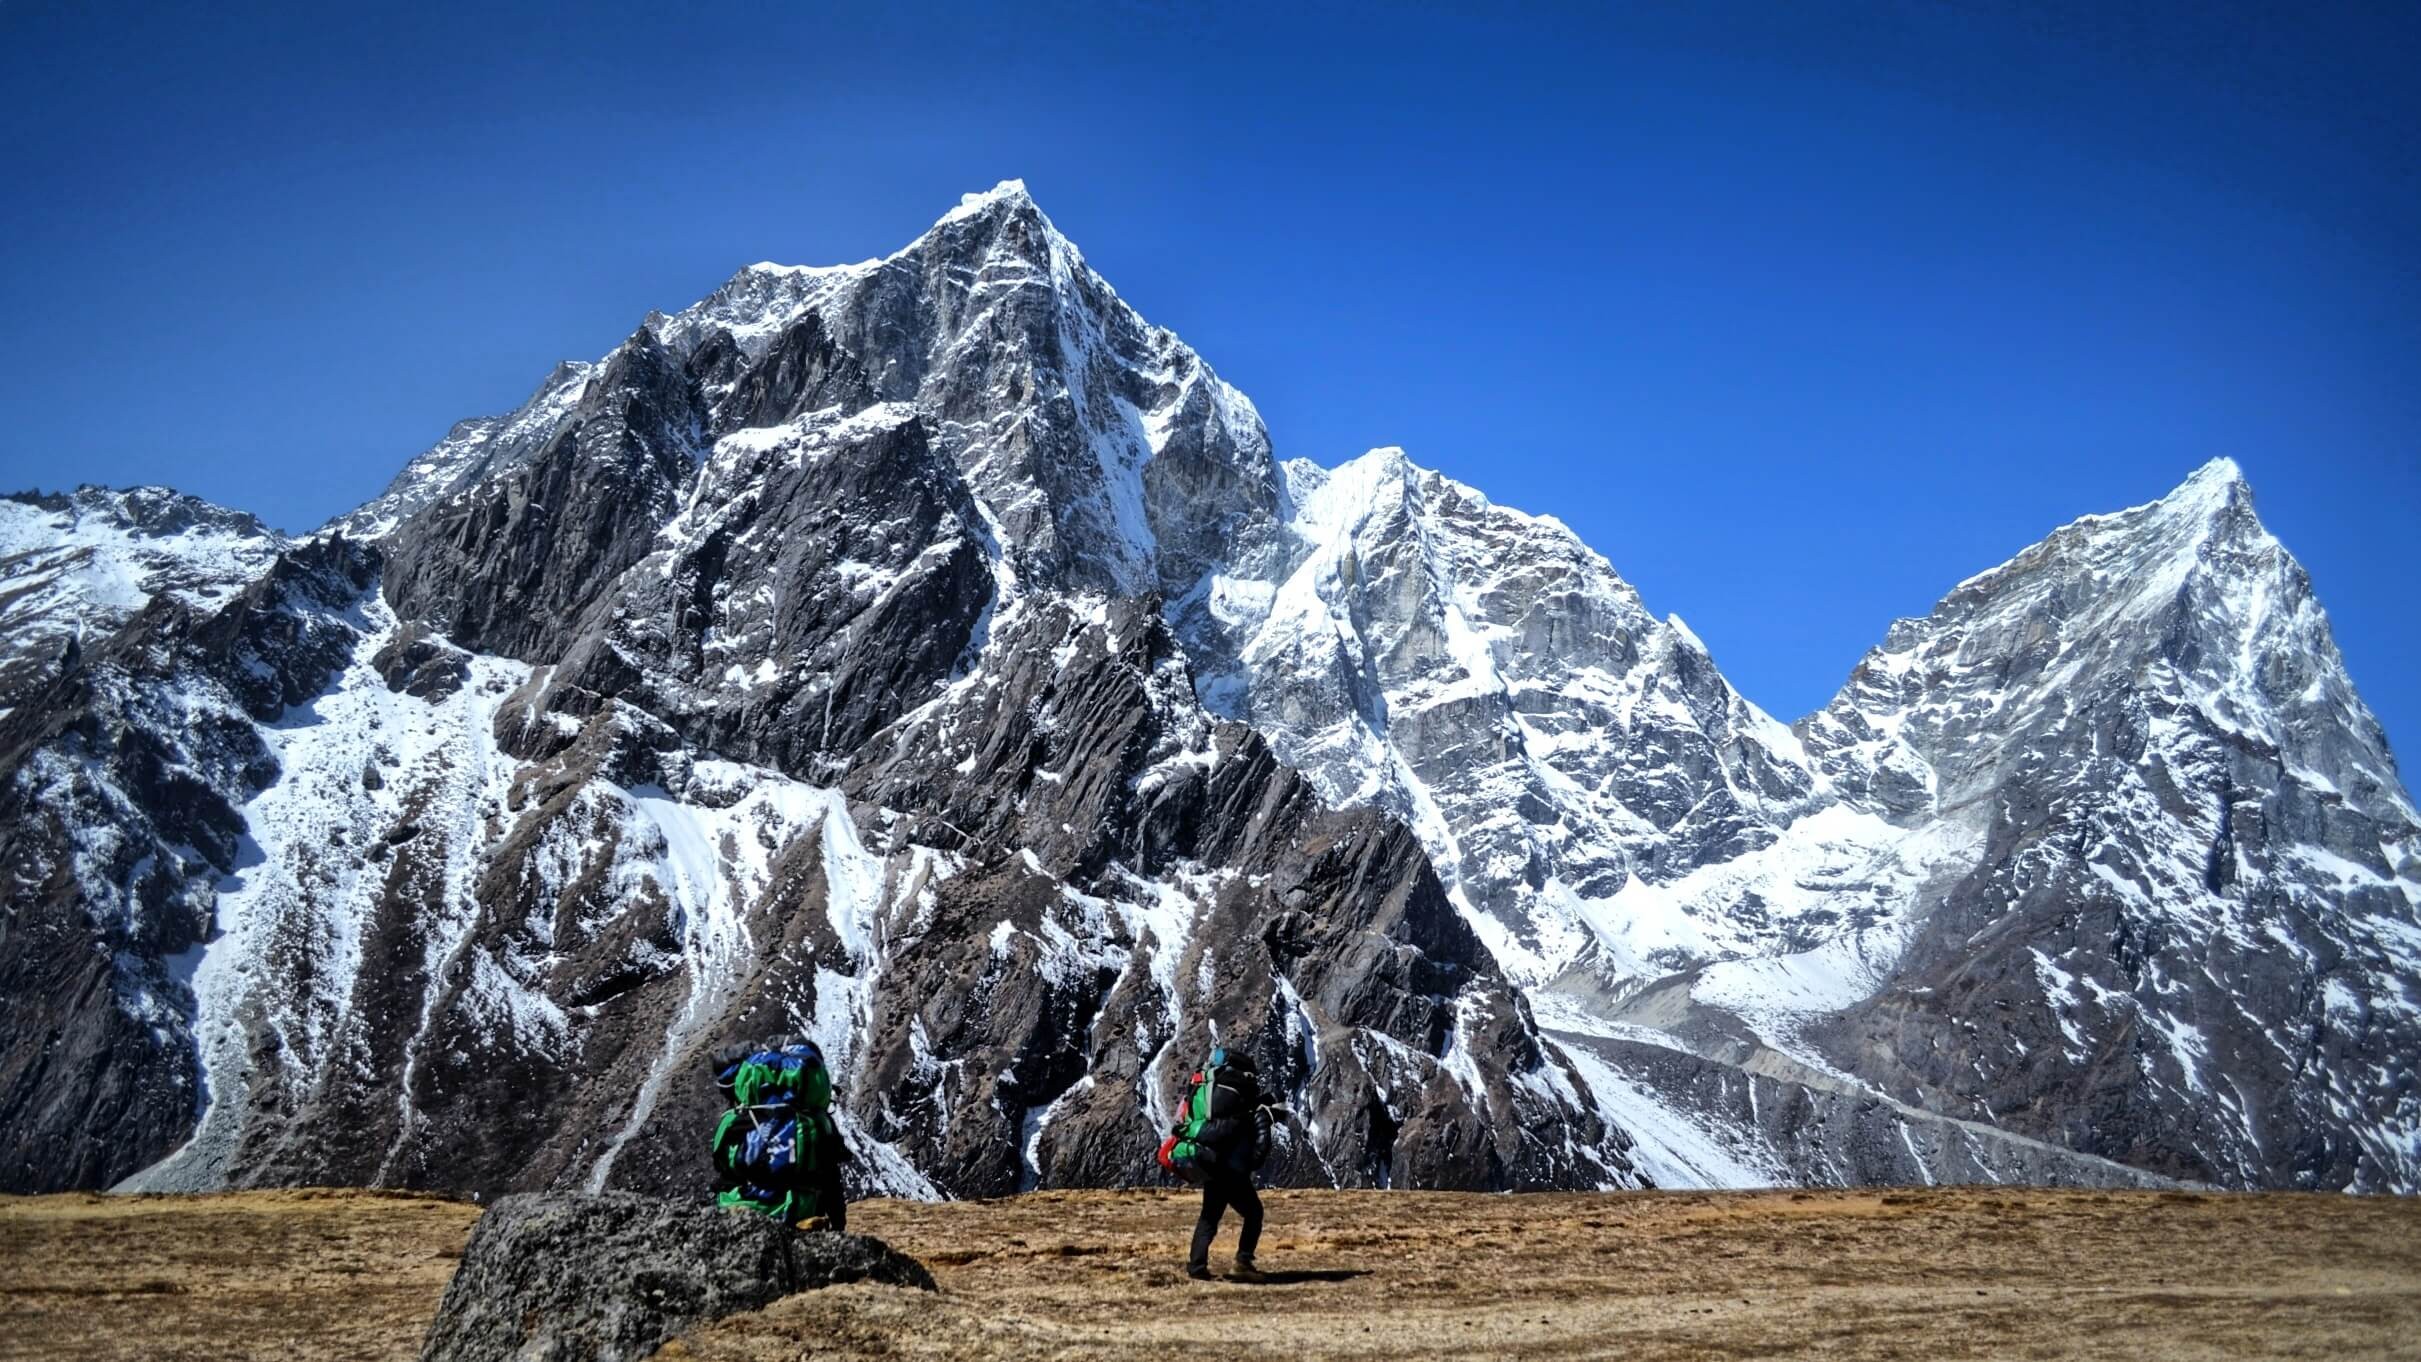 Porter Carrying the Luggage of clients during Everest Trekking